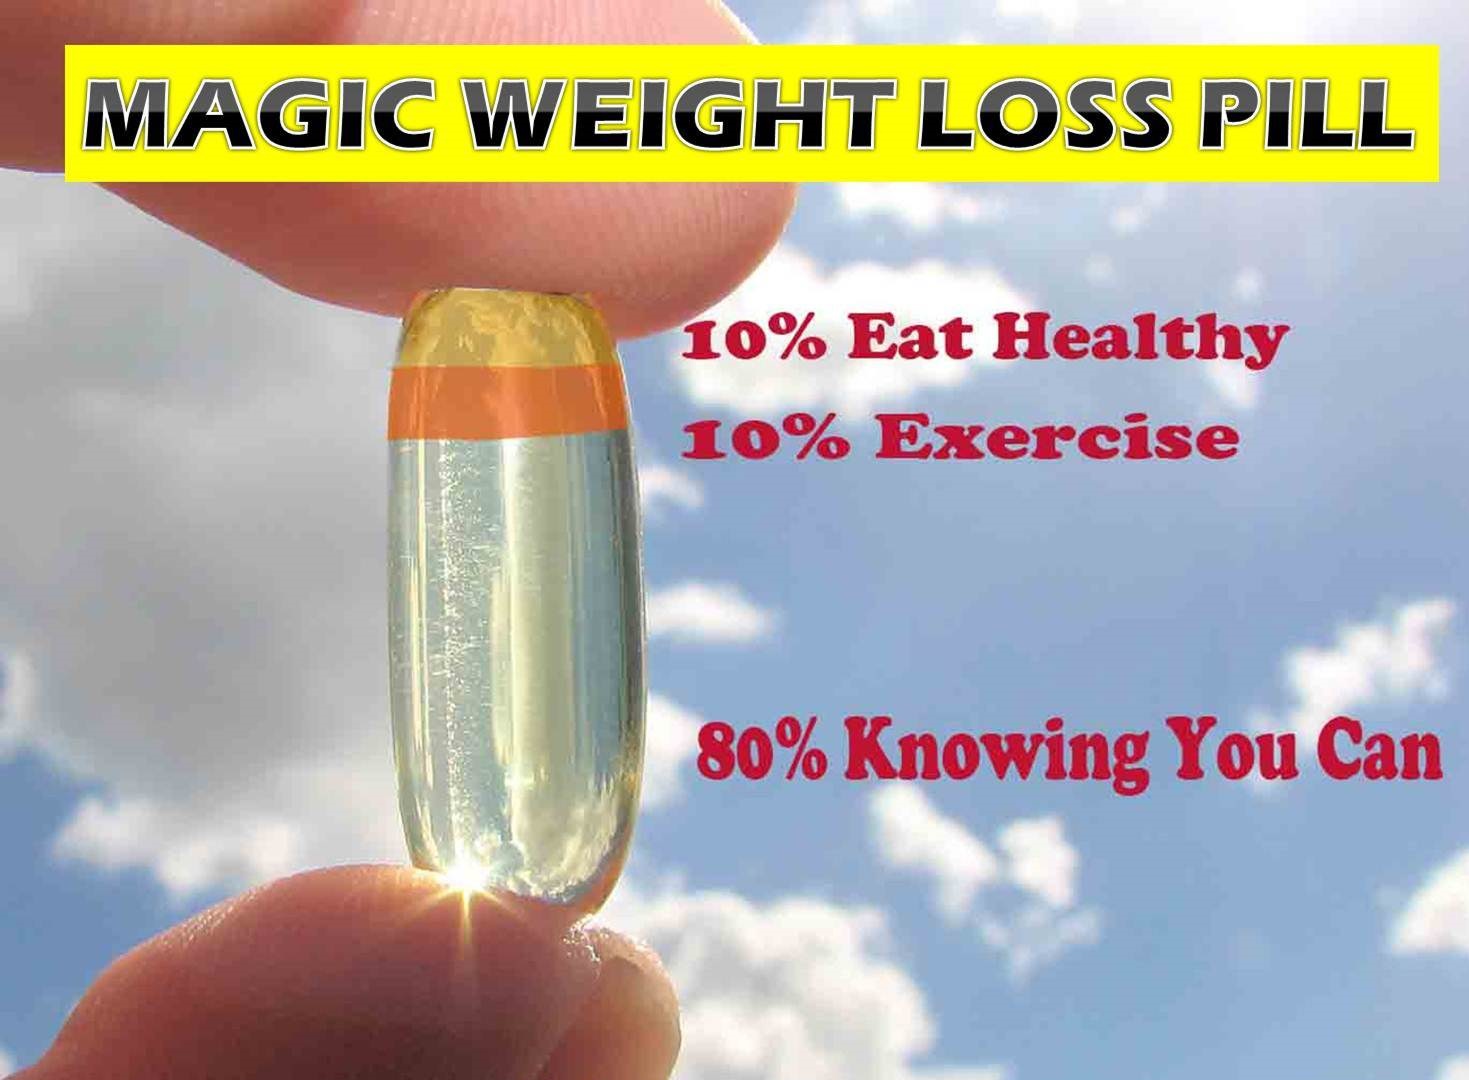 Stop Looking for a Magic Weight Loss Pill